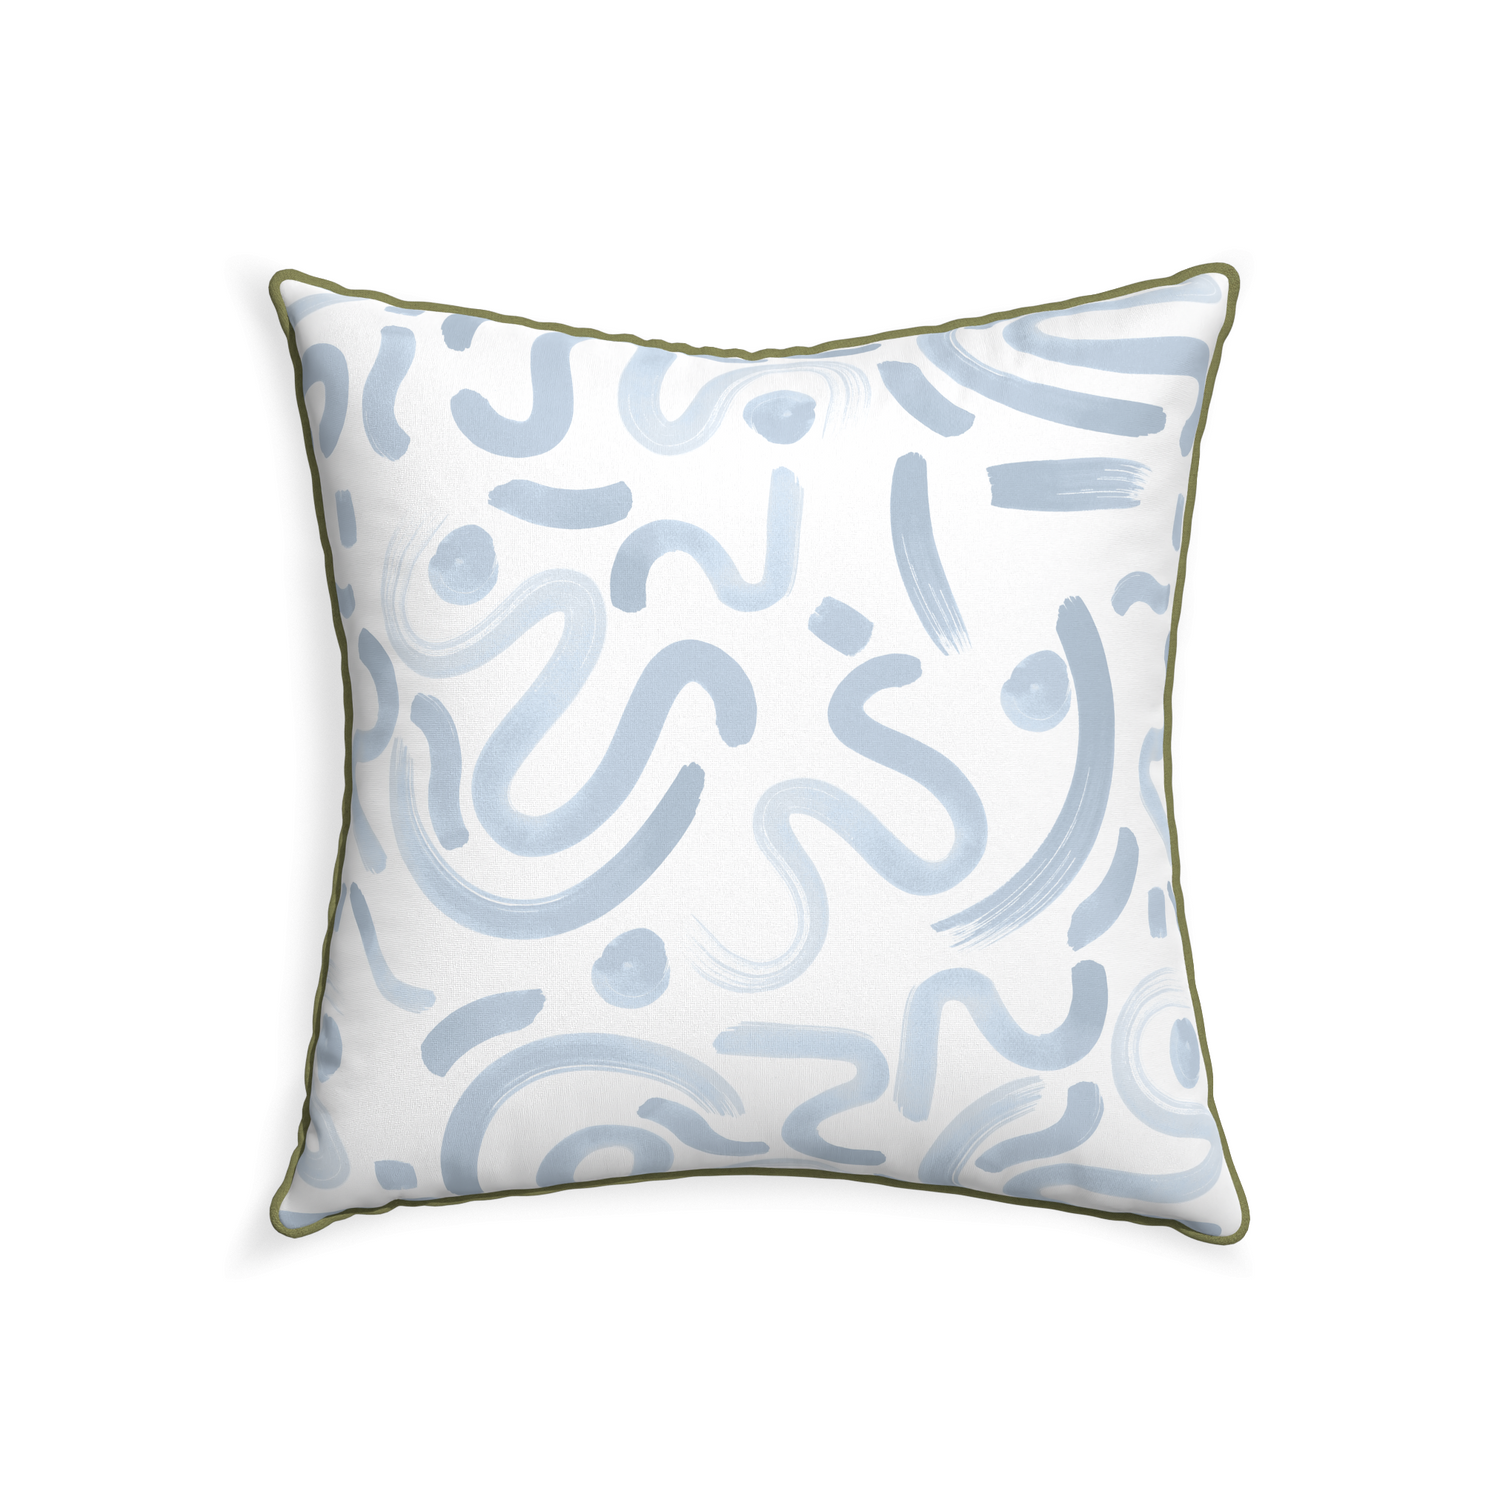 22-square hockney sky custom pillow with moss piping on white background